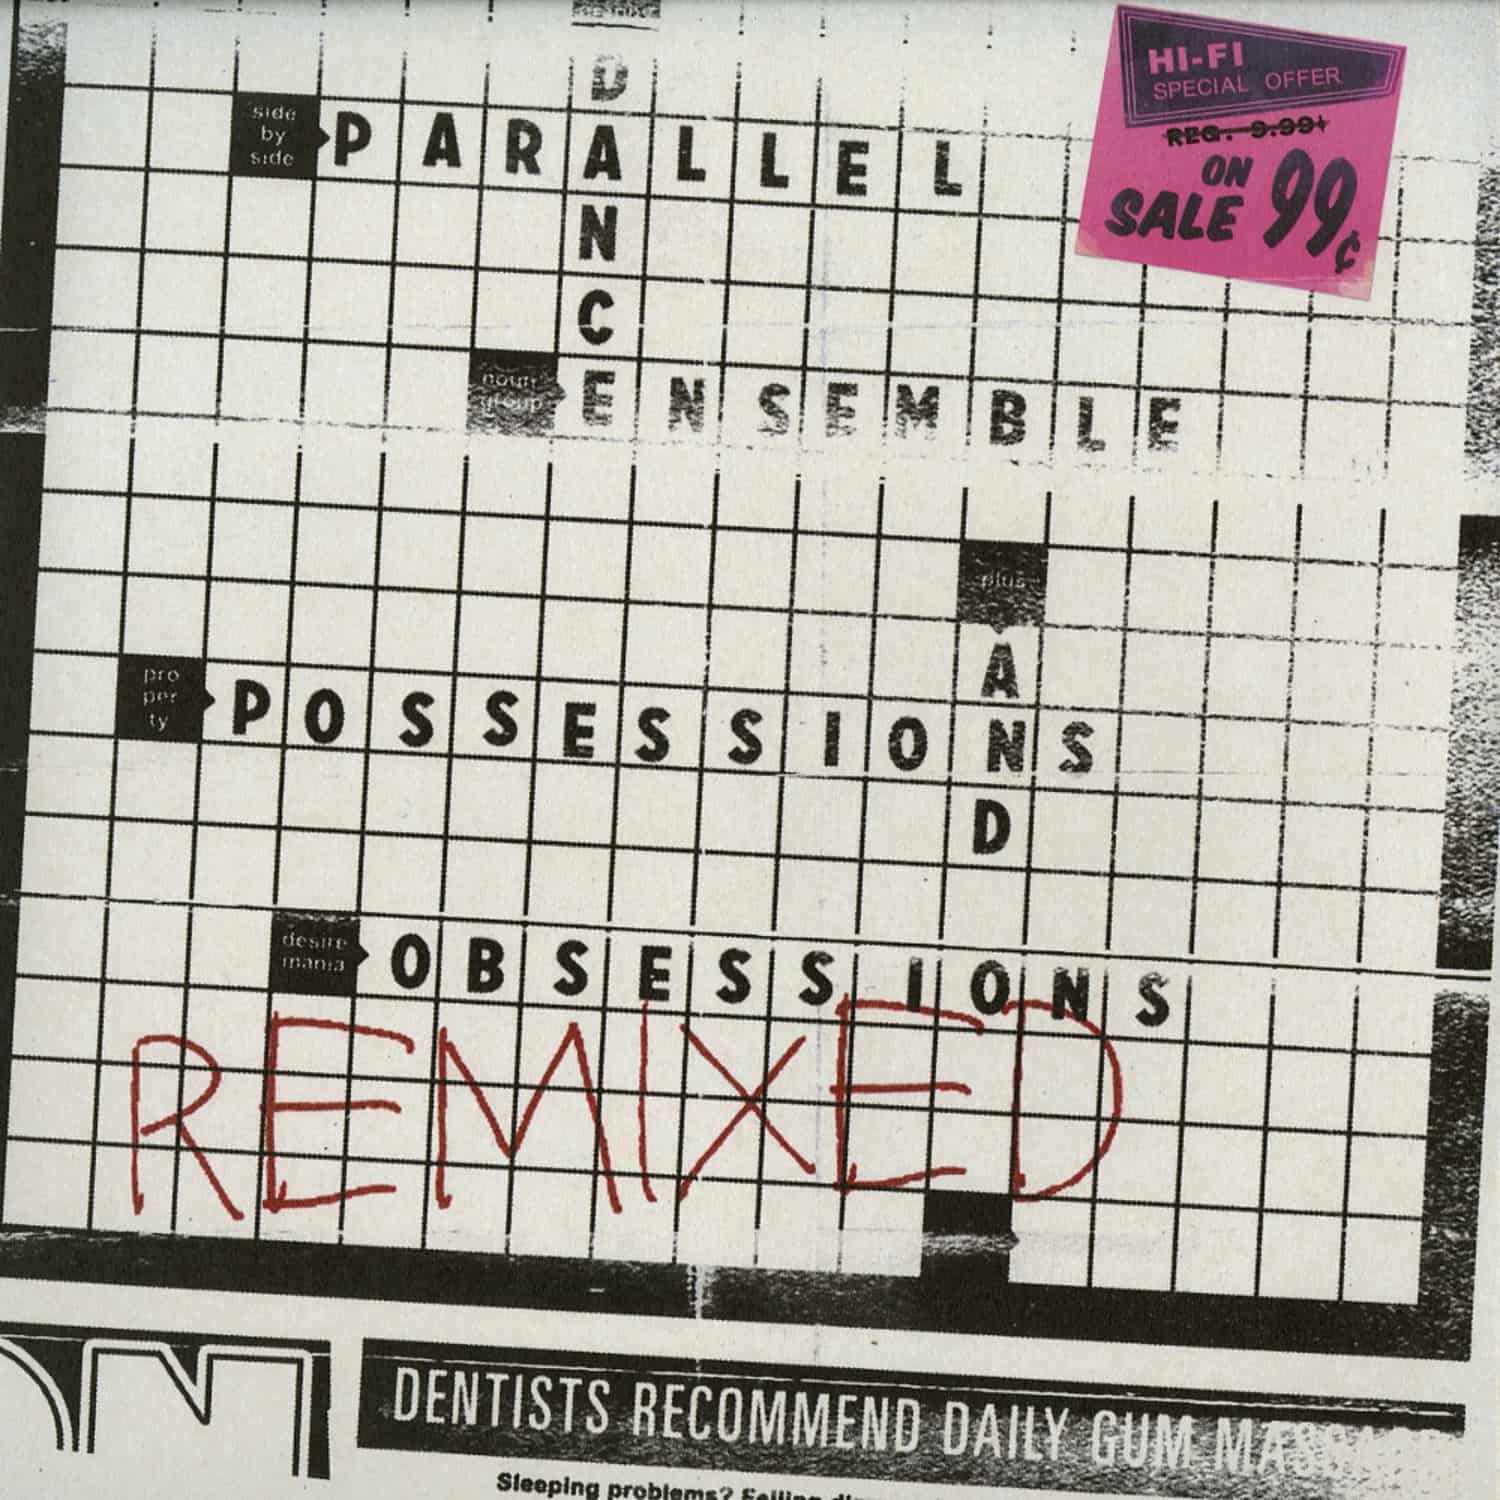 Parallel Dance Ensemble - POSSESSIONS AND OBSESSIONS REMIXED